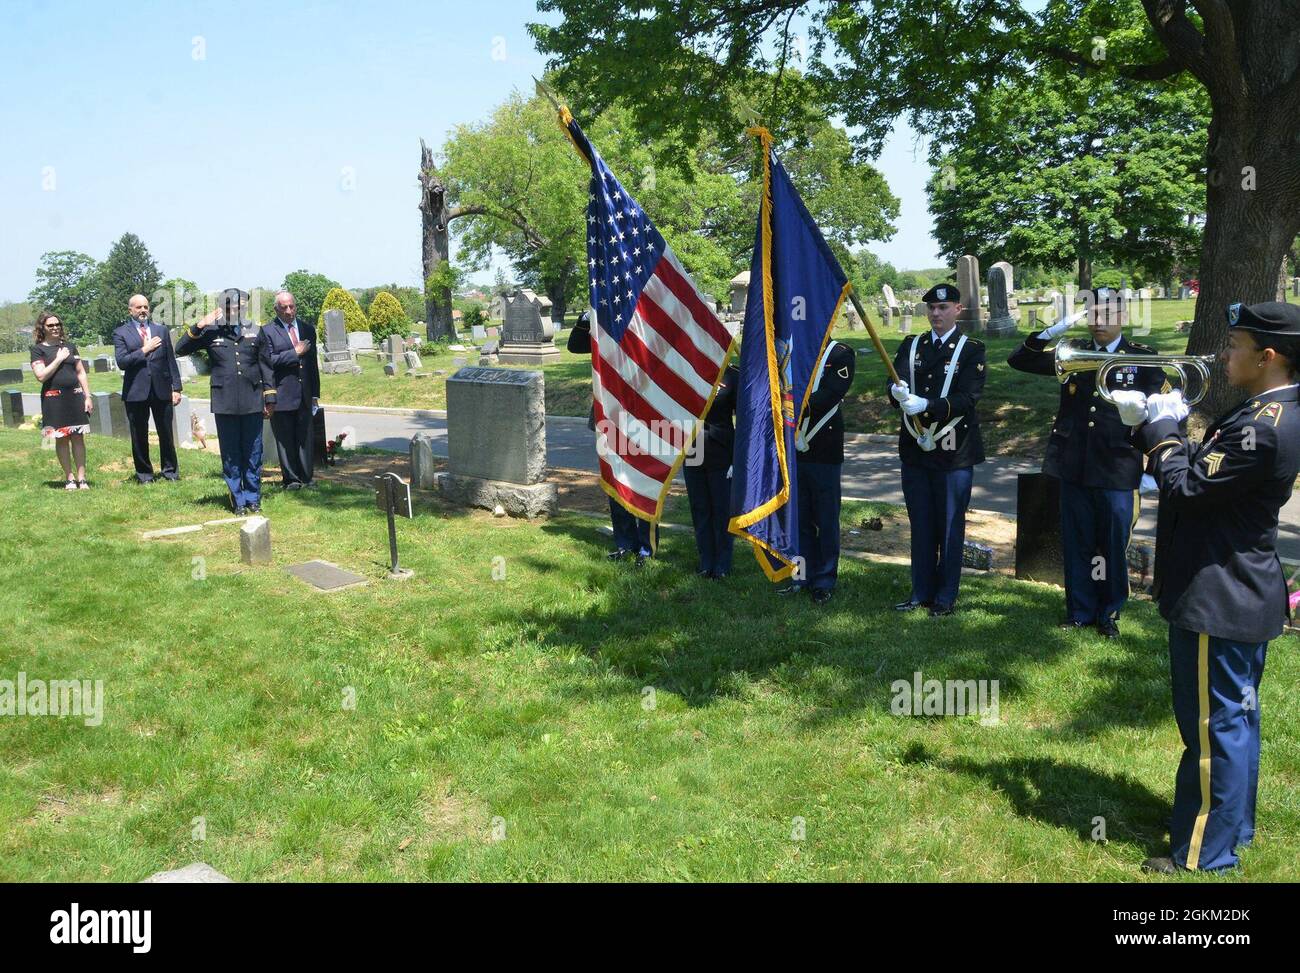 New York Army National Guard Sgt. Letty Luiz, far right, plays taps alongside a color guard of the 107th Military Police Company to render honors during a remembrance ceremony of Union Sgt. Benjamin Levy, the first Jewish American to receive the Medal of Honor, at his burial site at Cypress Hills Cemetery in Brooklyn, N.Y., May 21, 2021. Levy was a New York Soldier who received the Medal of Honor for his actions to save his regimental colors and rally his unit, the 1st New York Volunteer Infantry Regiment, during the Battle of Glendale in June 1862. Stock Photo